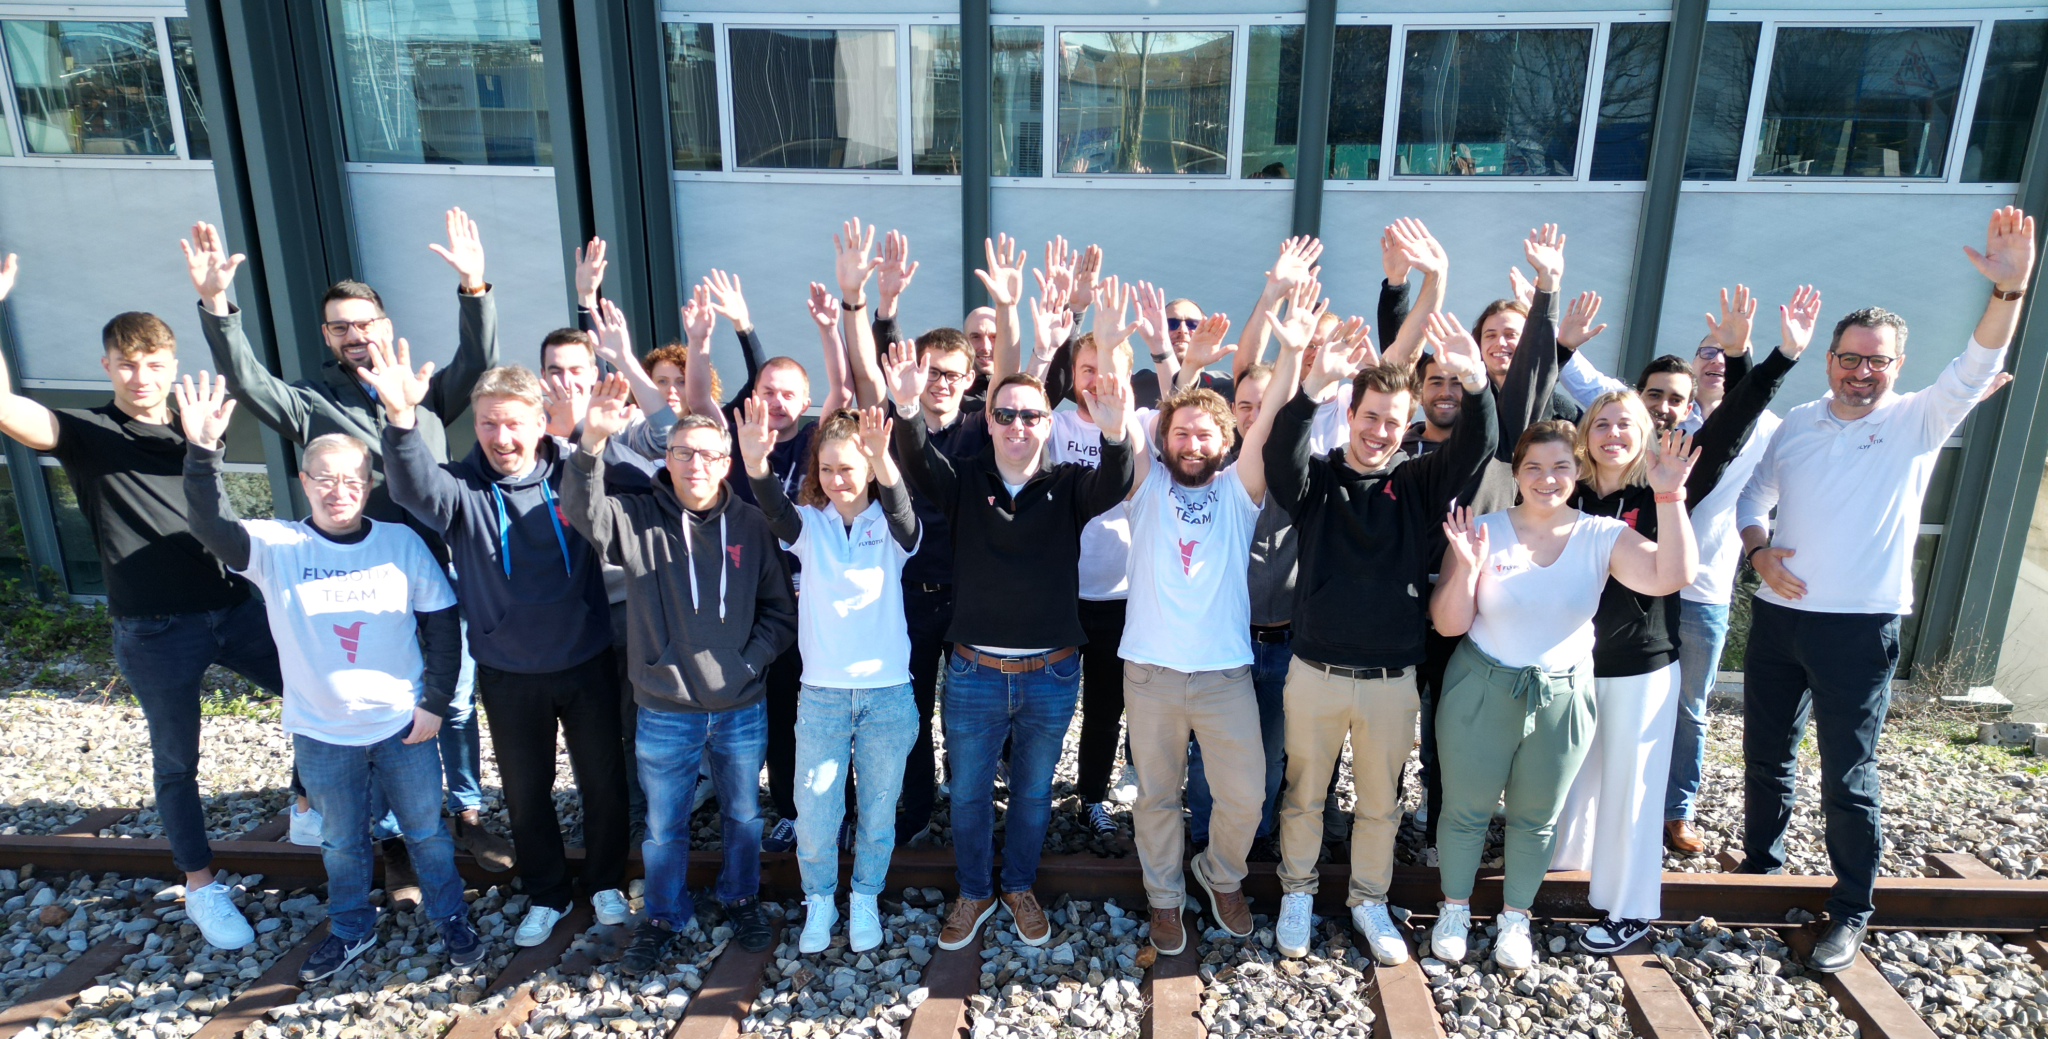 Group picture of Flybotix employees outside with hands raised